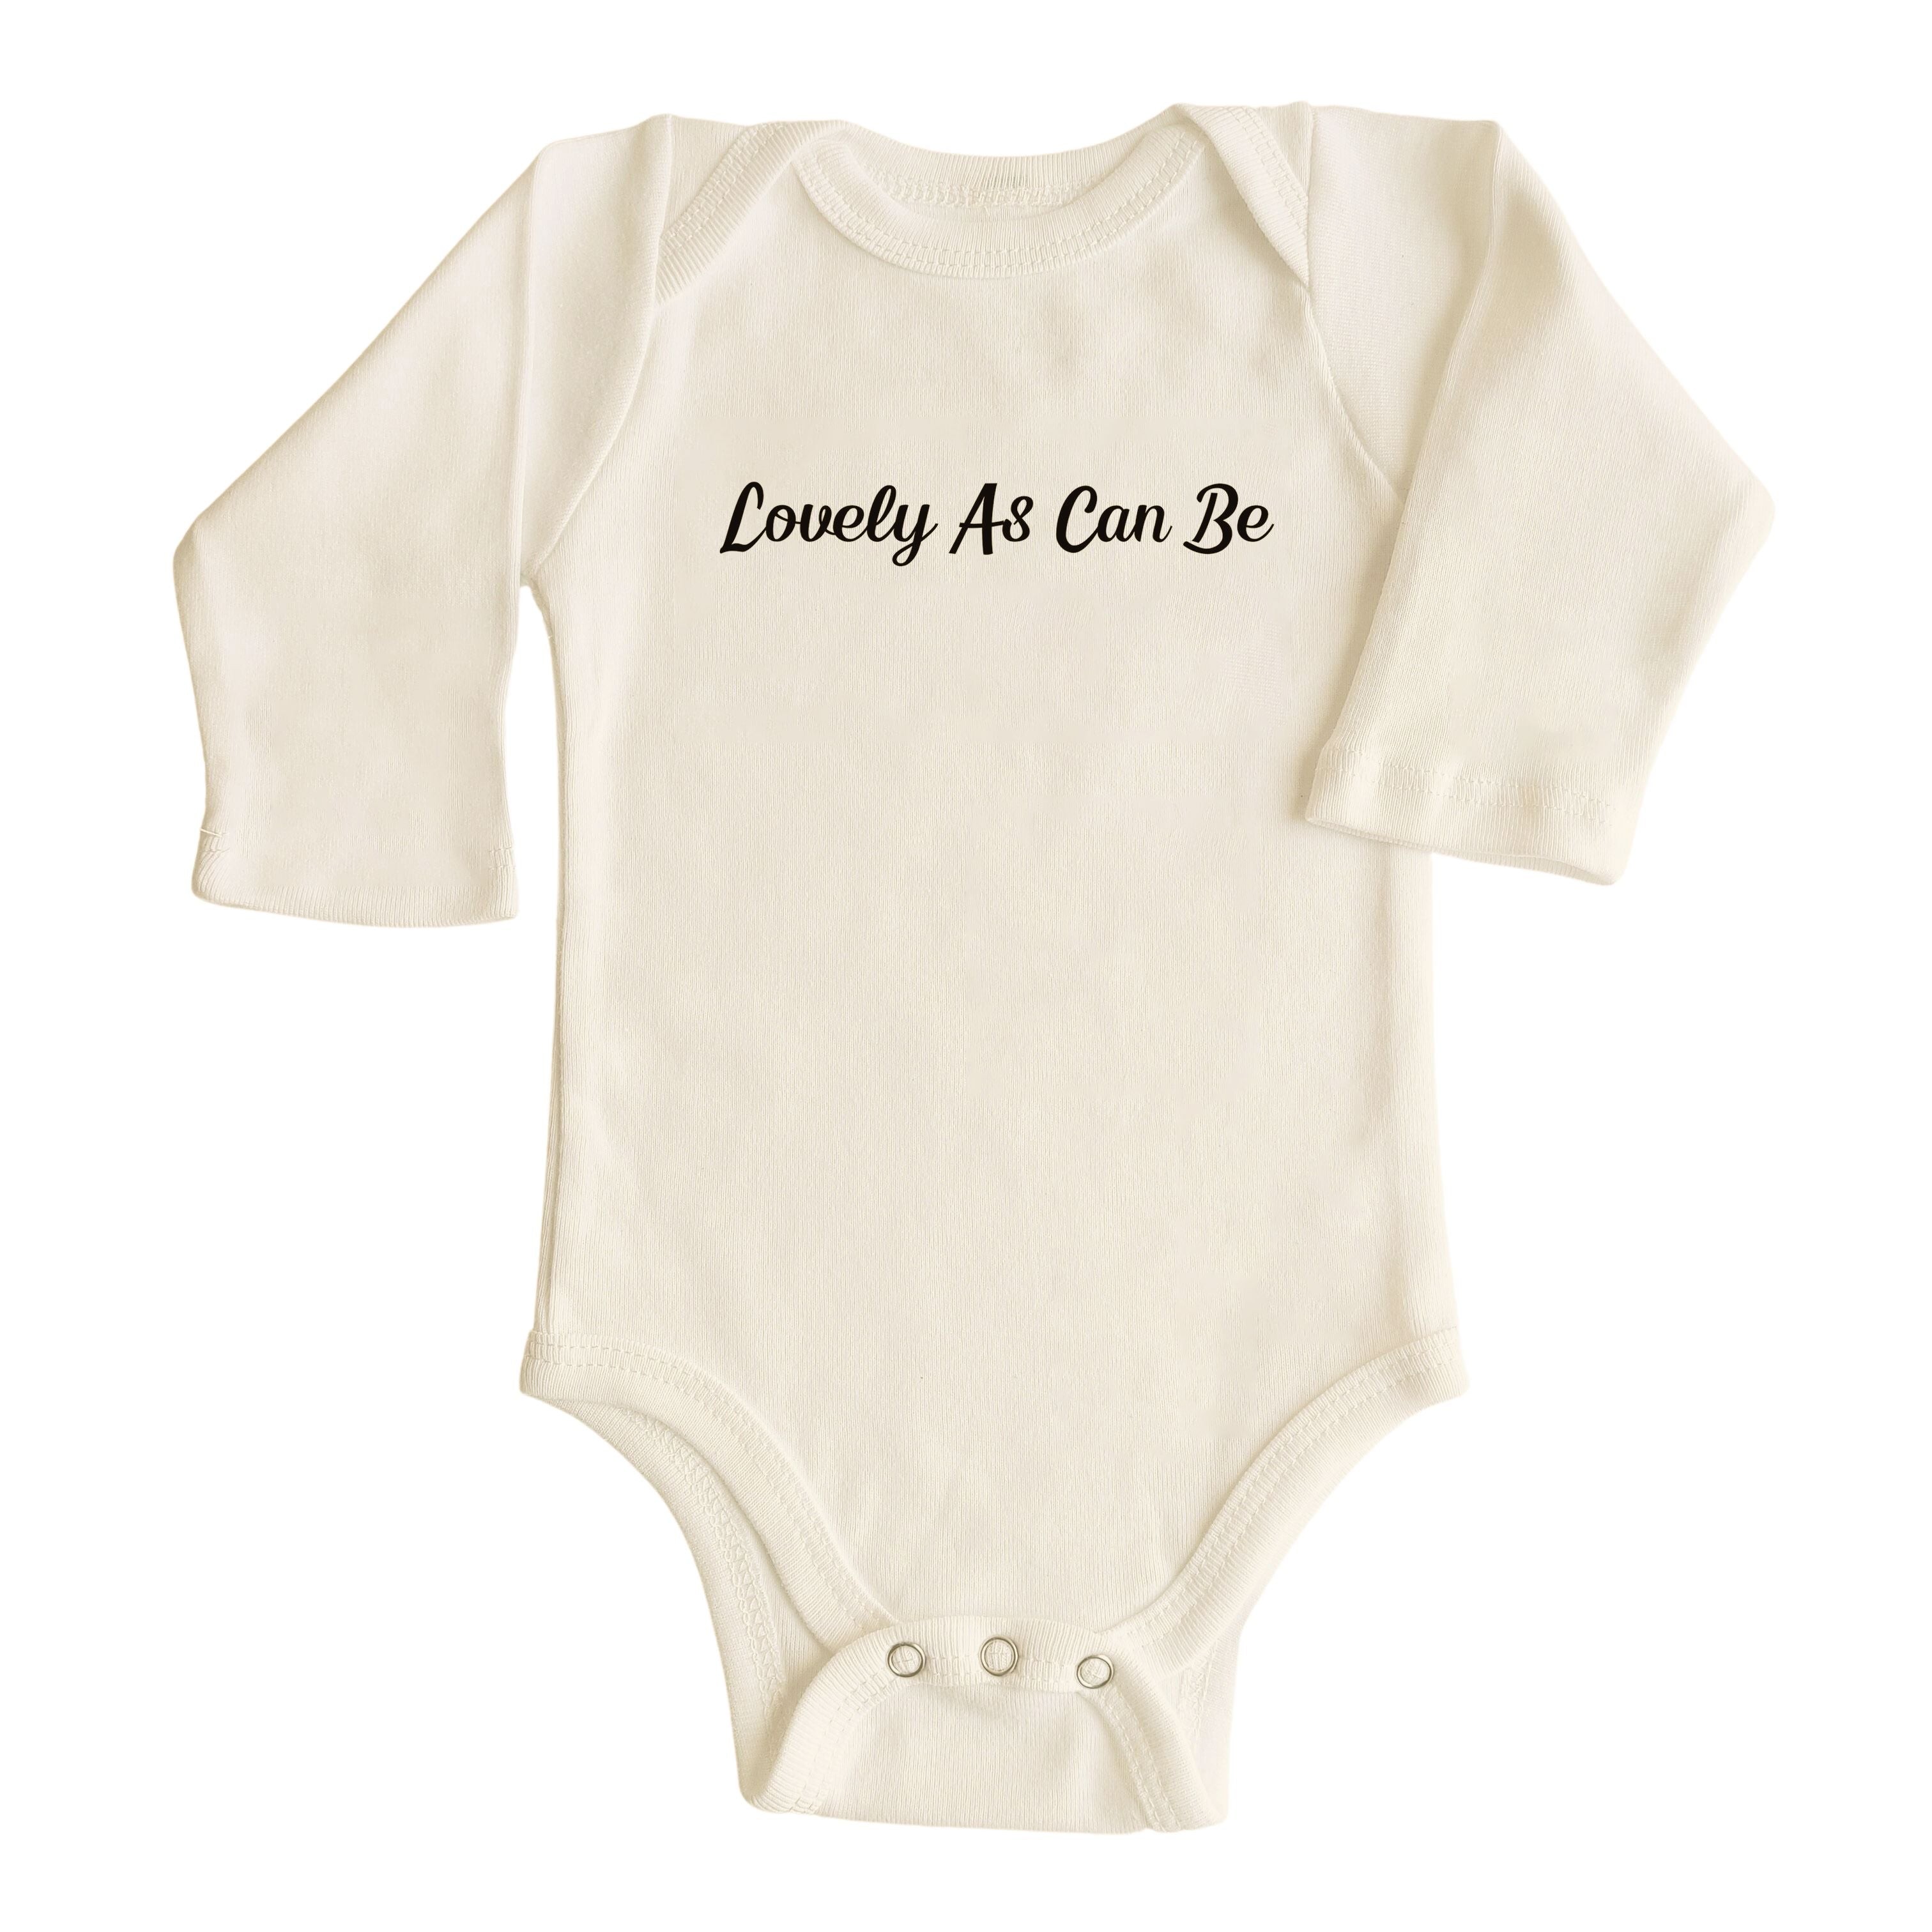 Jedbaby Lovely As Can Be Long Sleeve Organic Cotton Baby Onesie Bodysuit